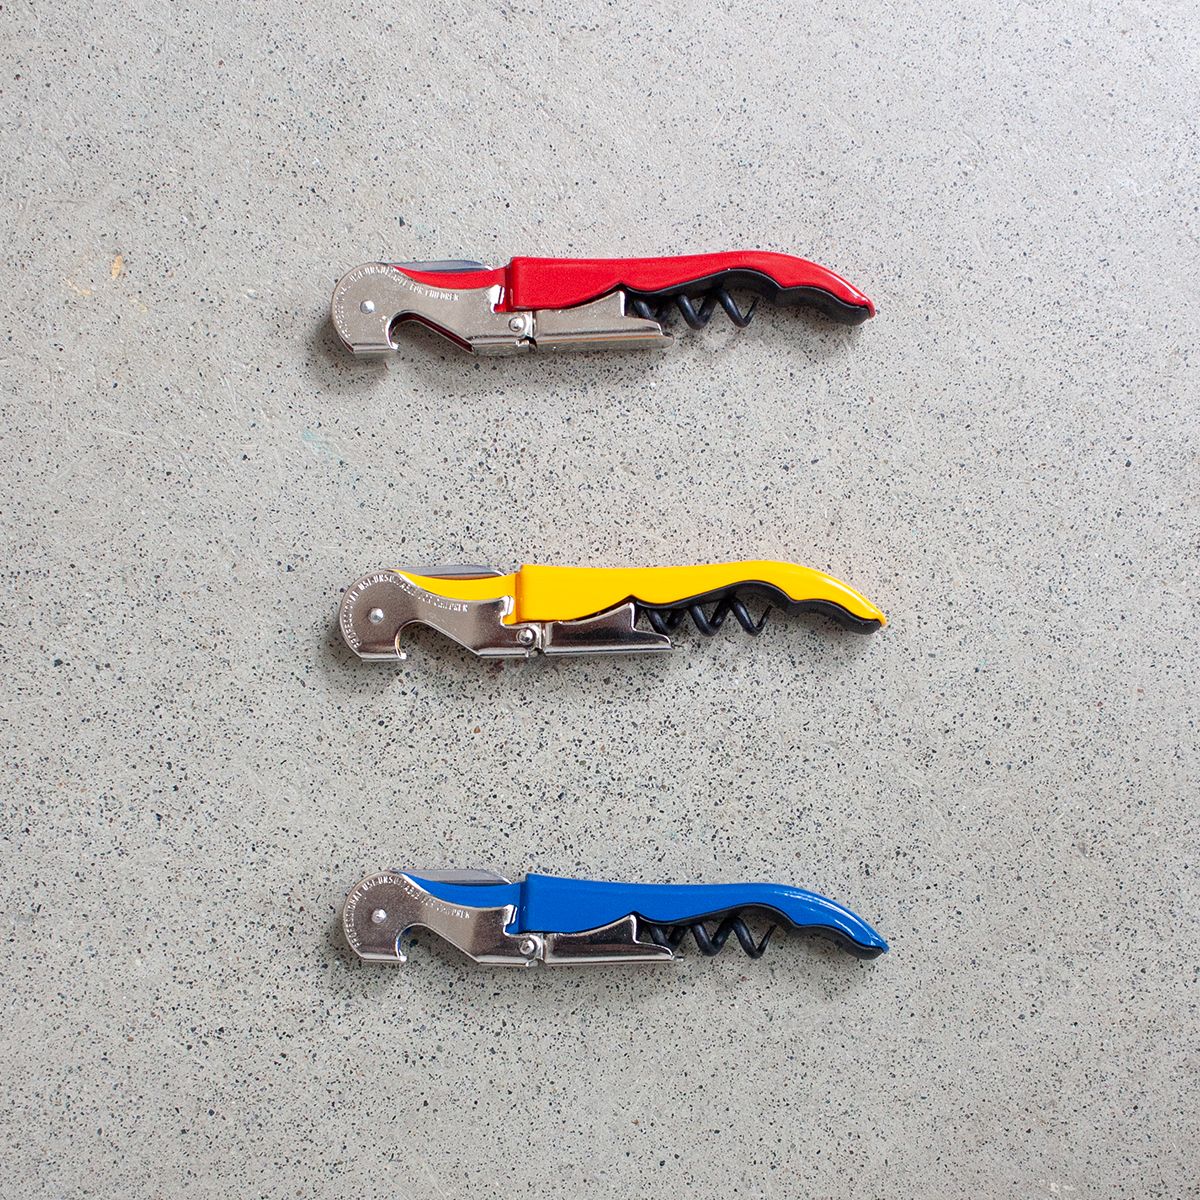 A red, yellow, and blue corkscrew are placed parallel to each other on a concrete surface.